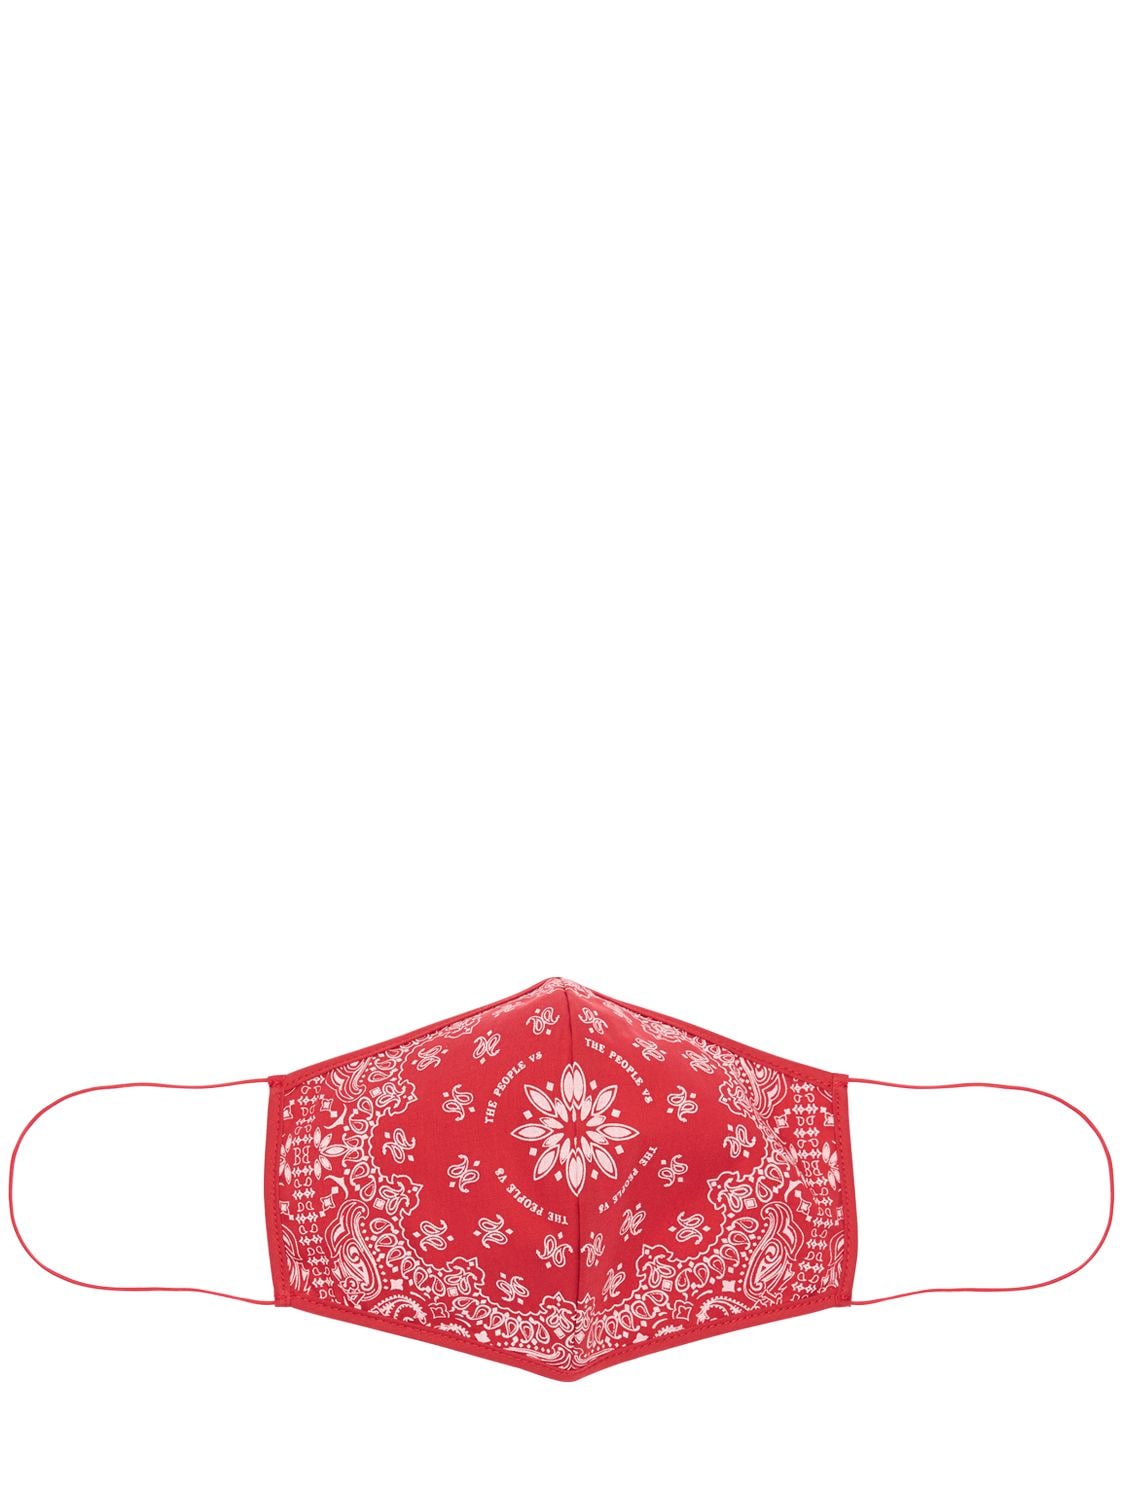 The People Vs Red Bandana Printed Face Mask In Red,multi